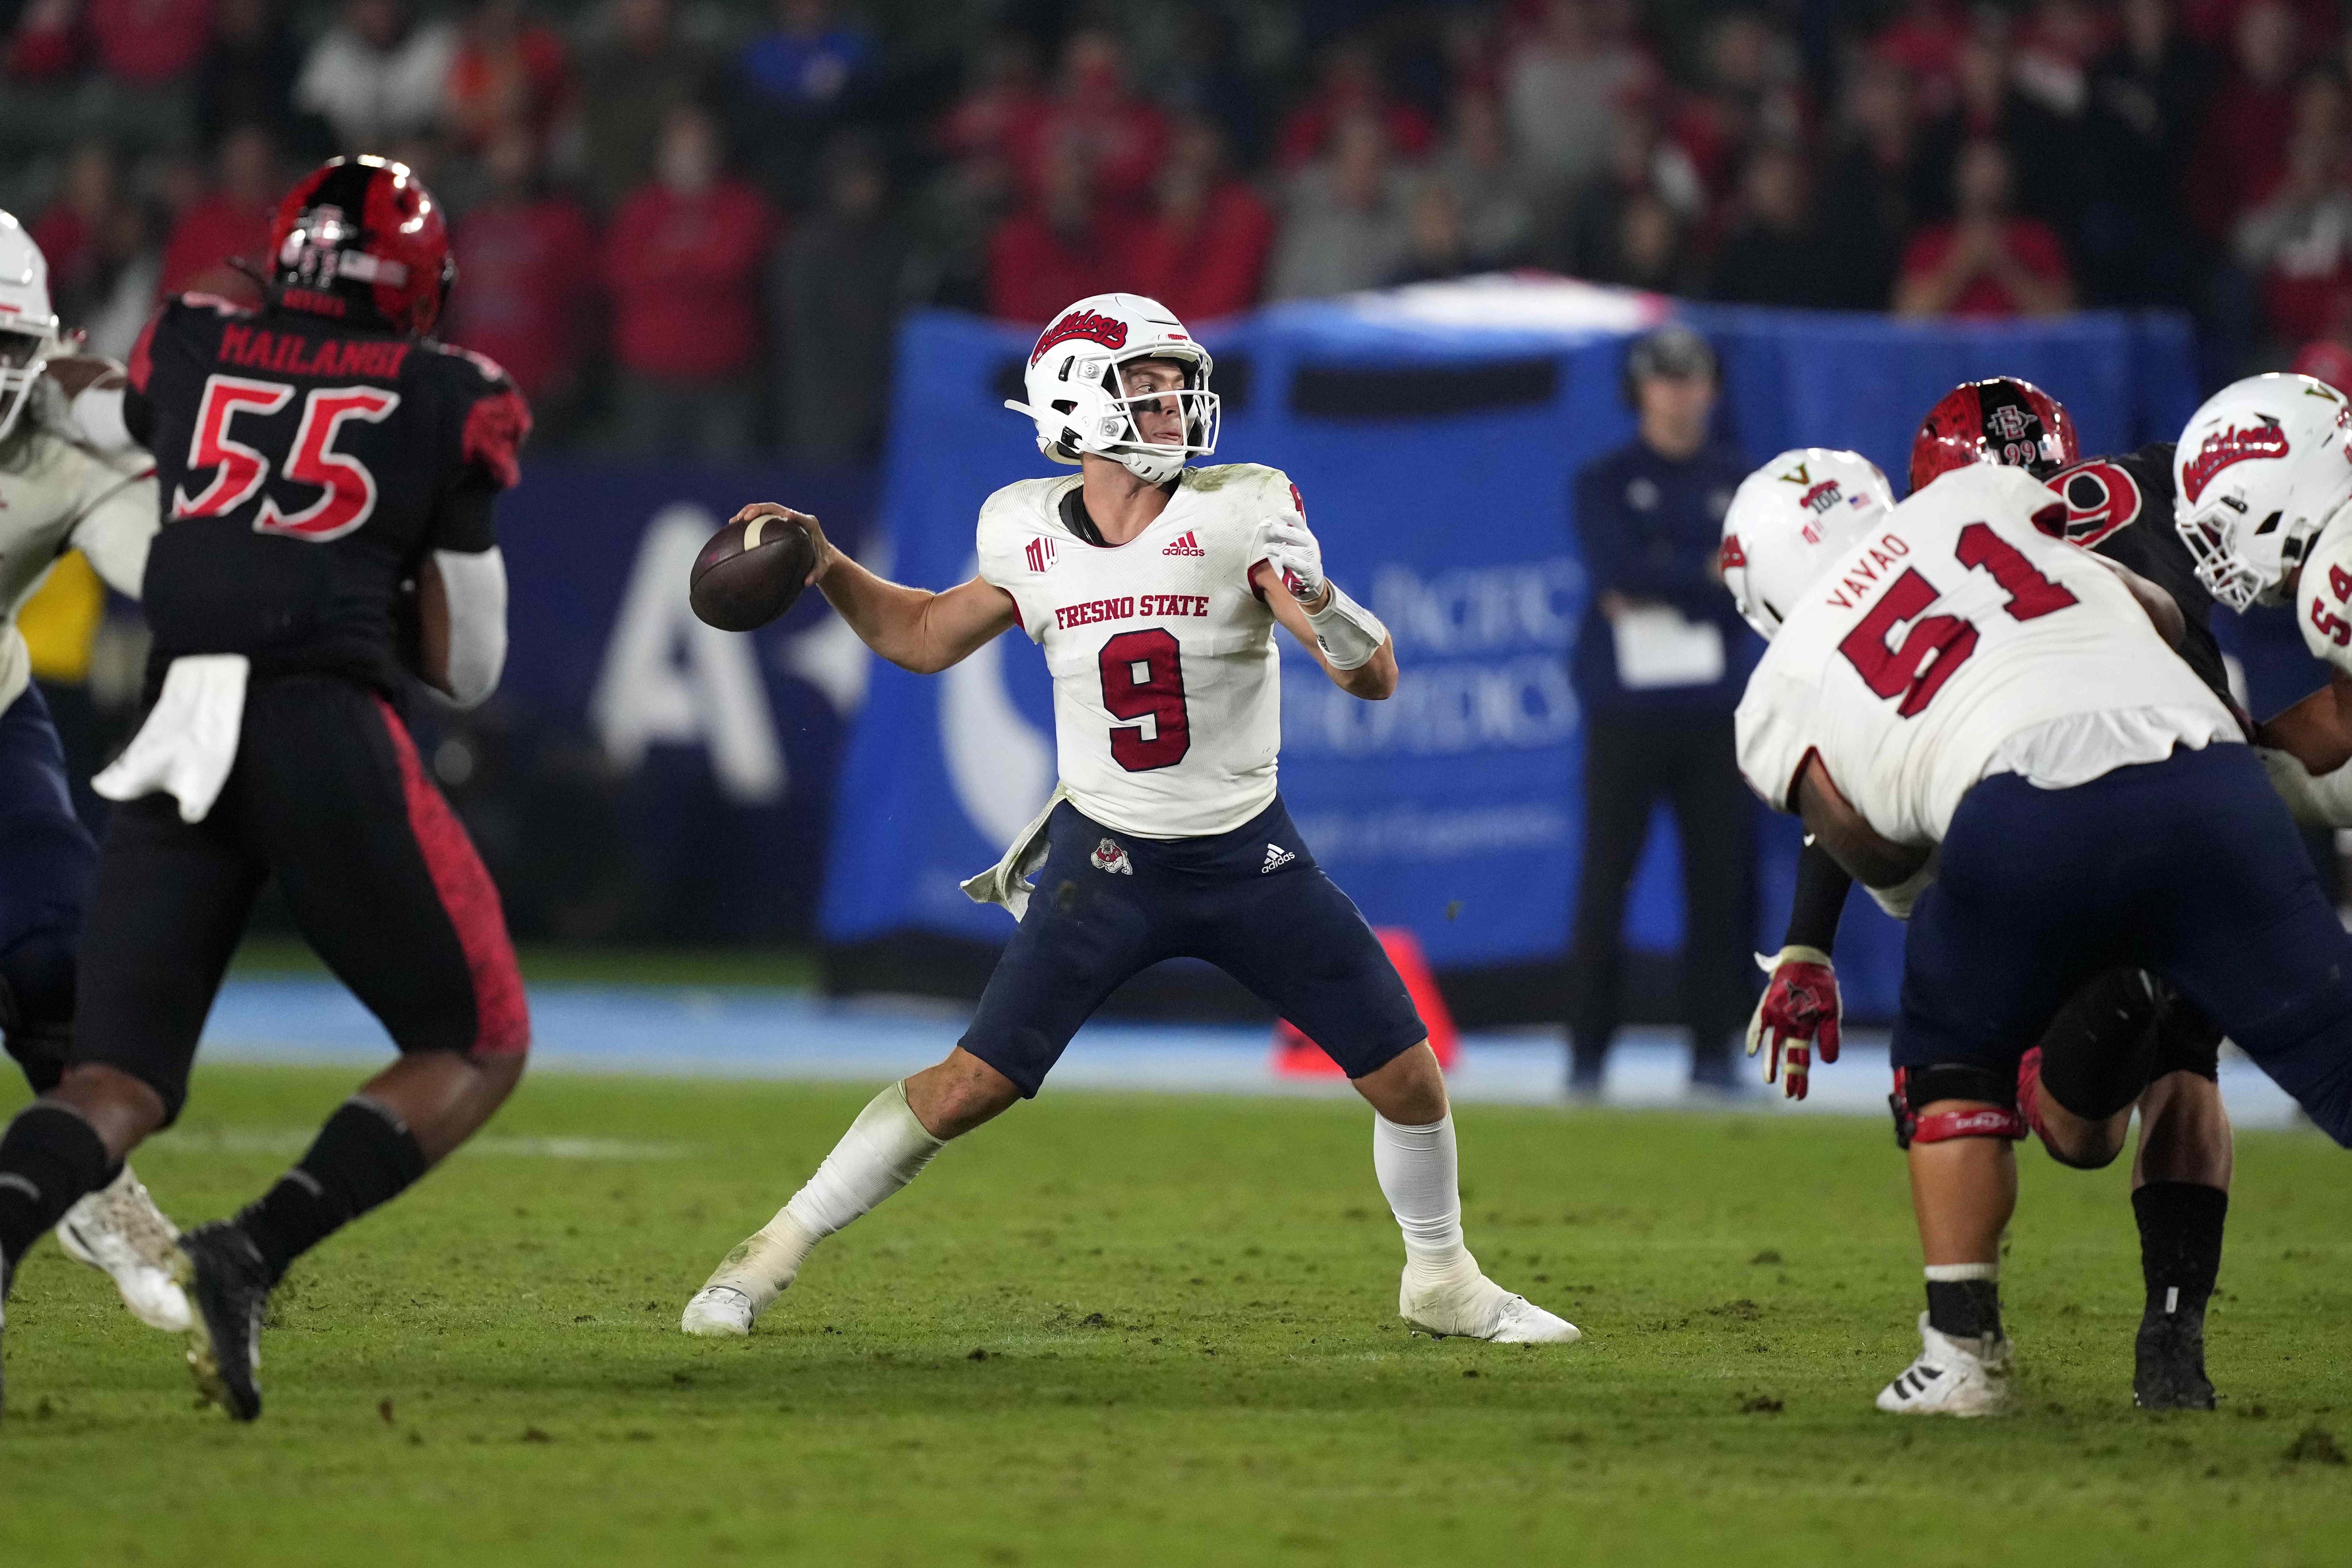 Can Jake Haener stay hot and lead Fresno State to another win?